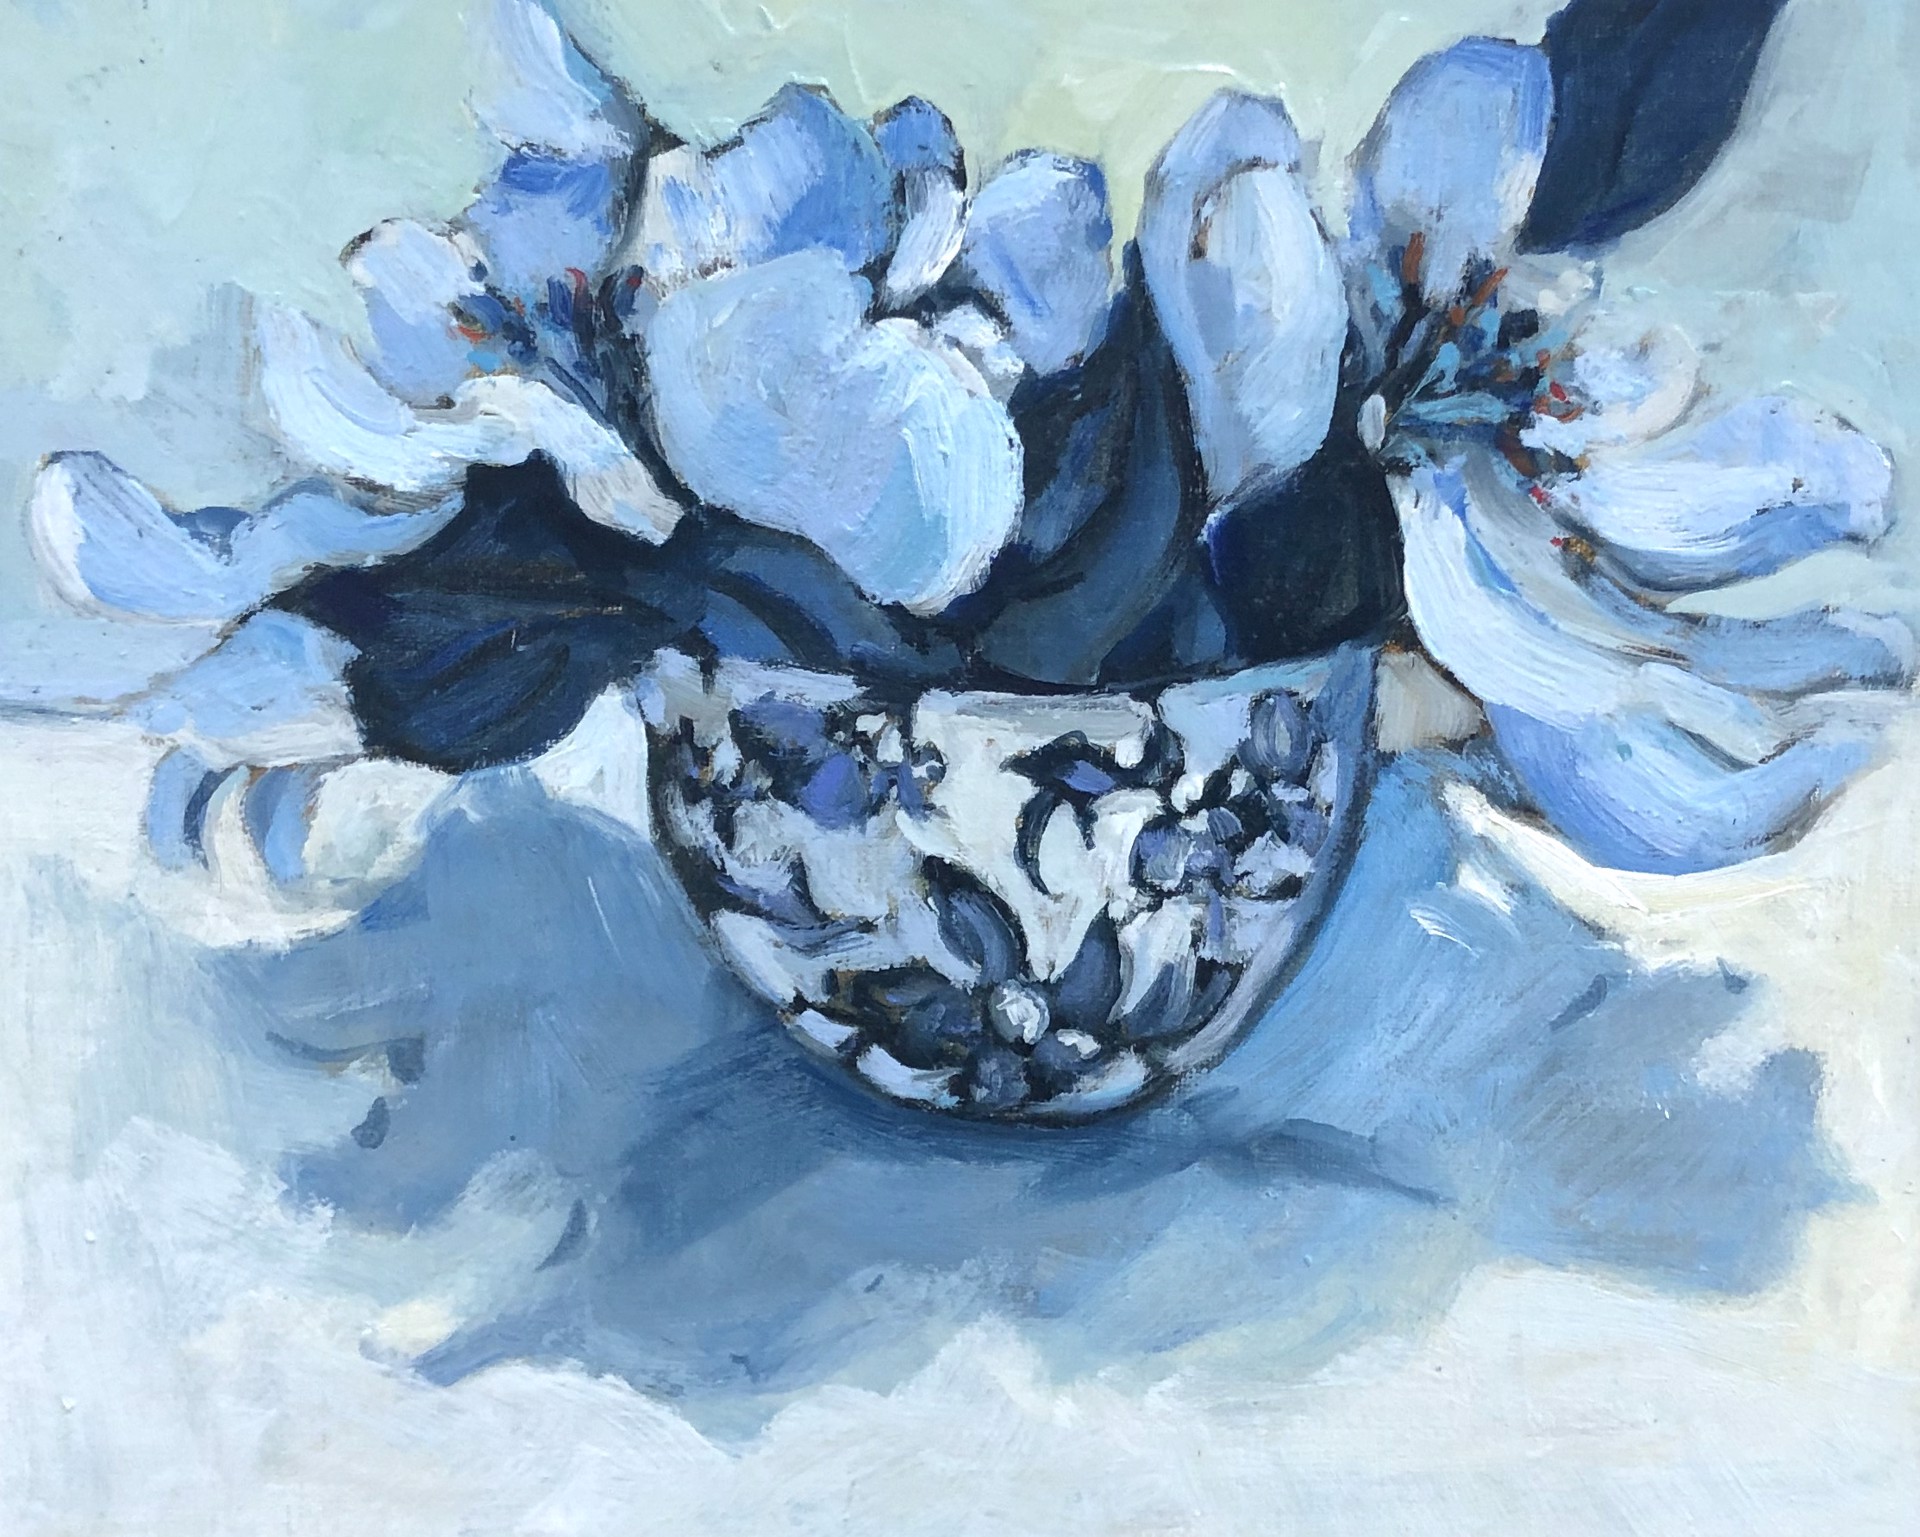 Teacup Blues by Chelle Gunderson